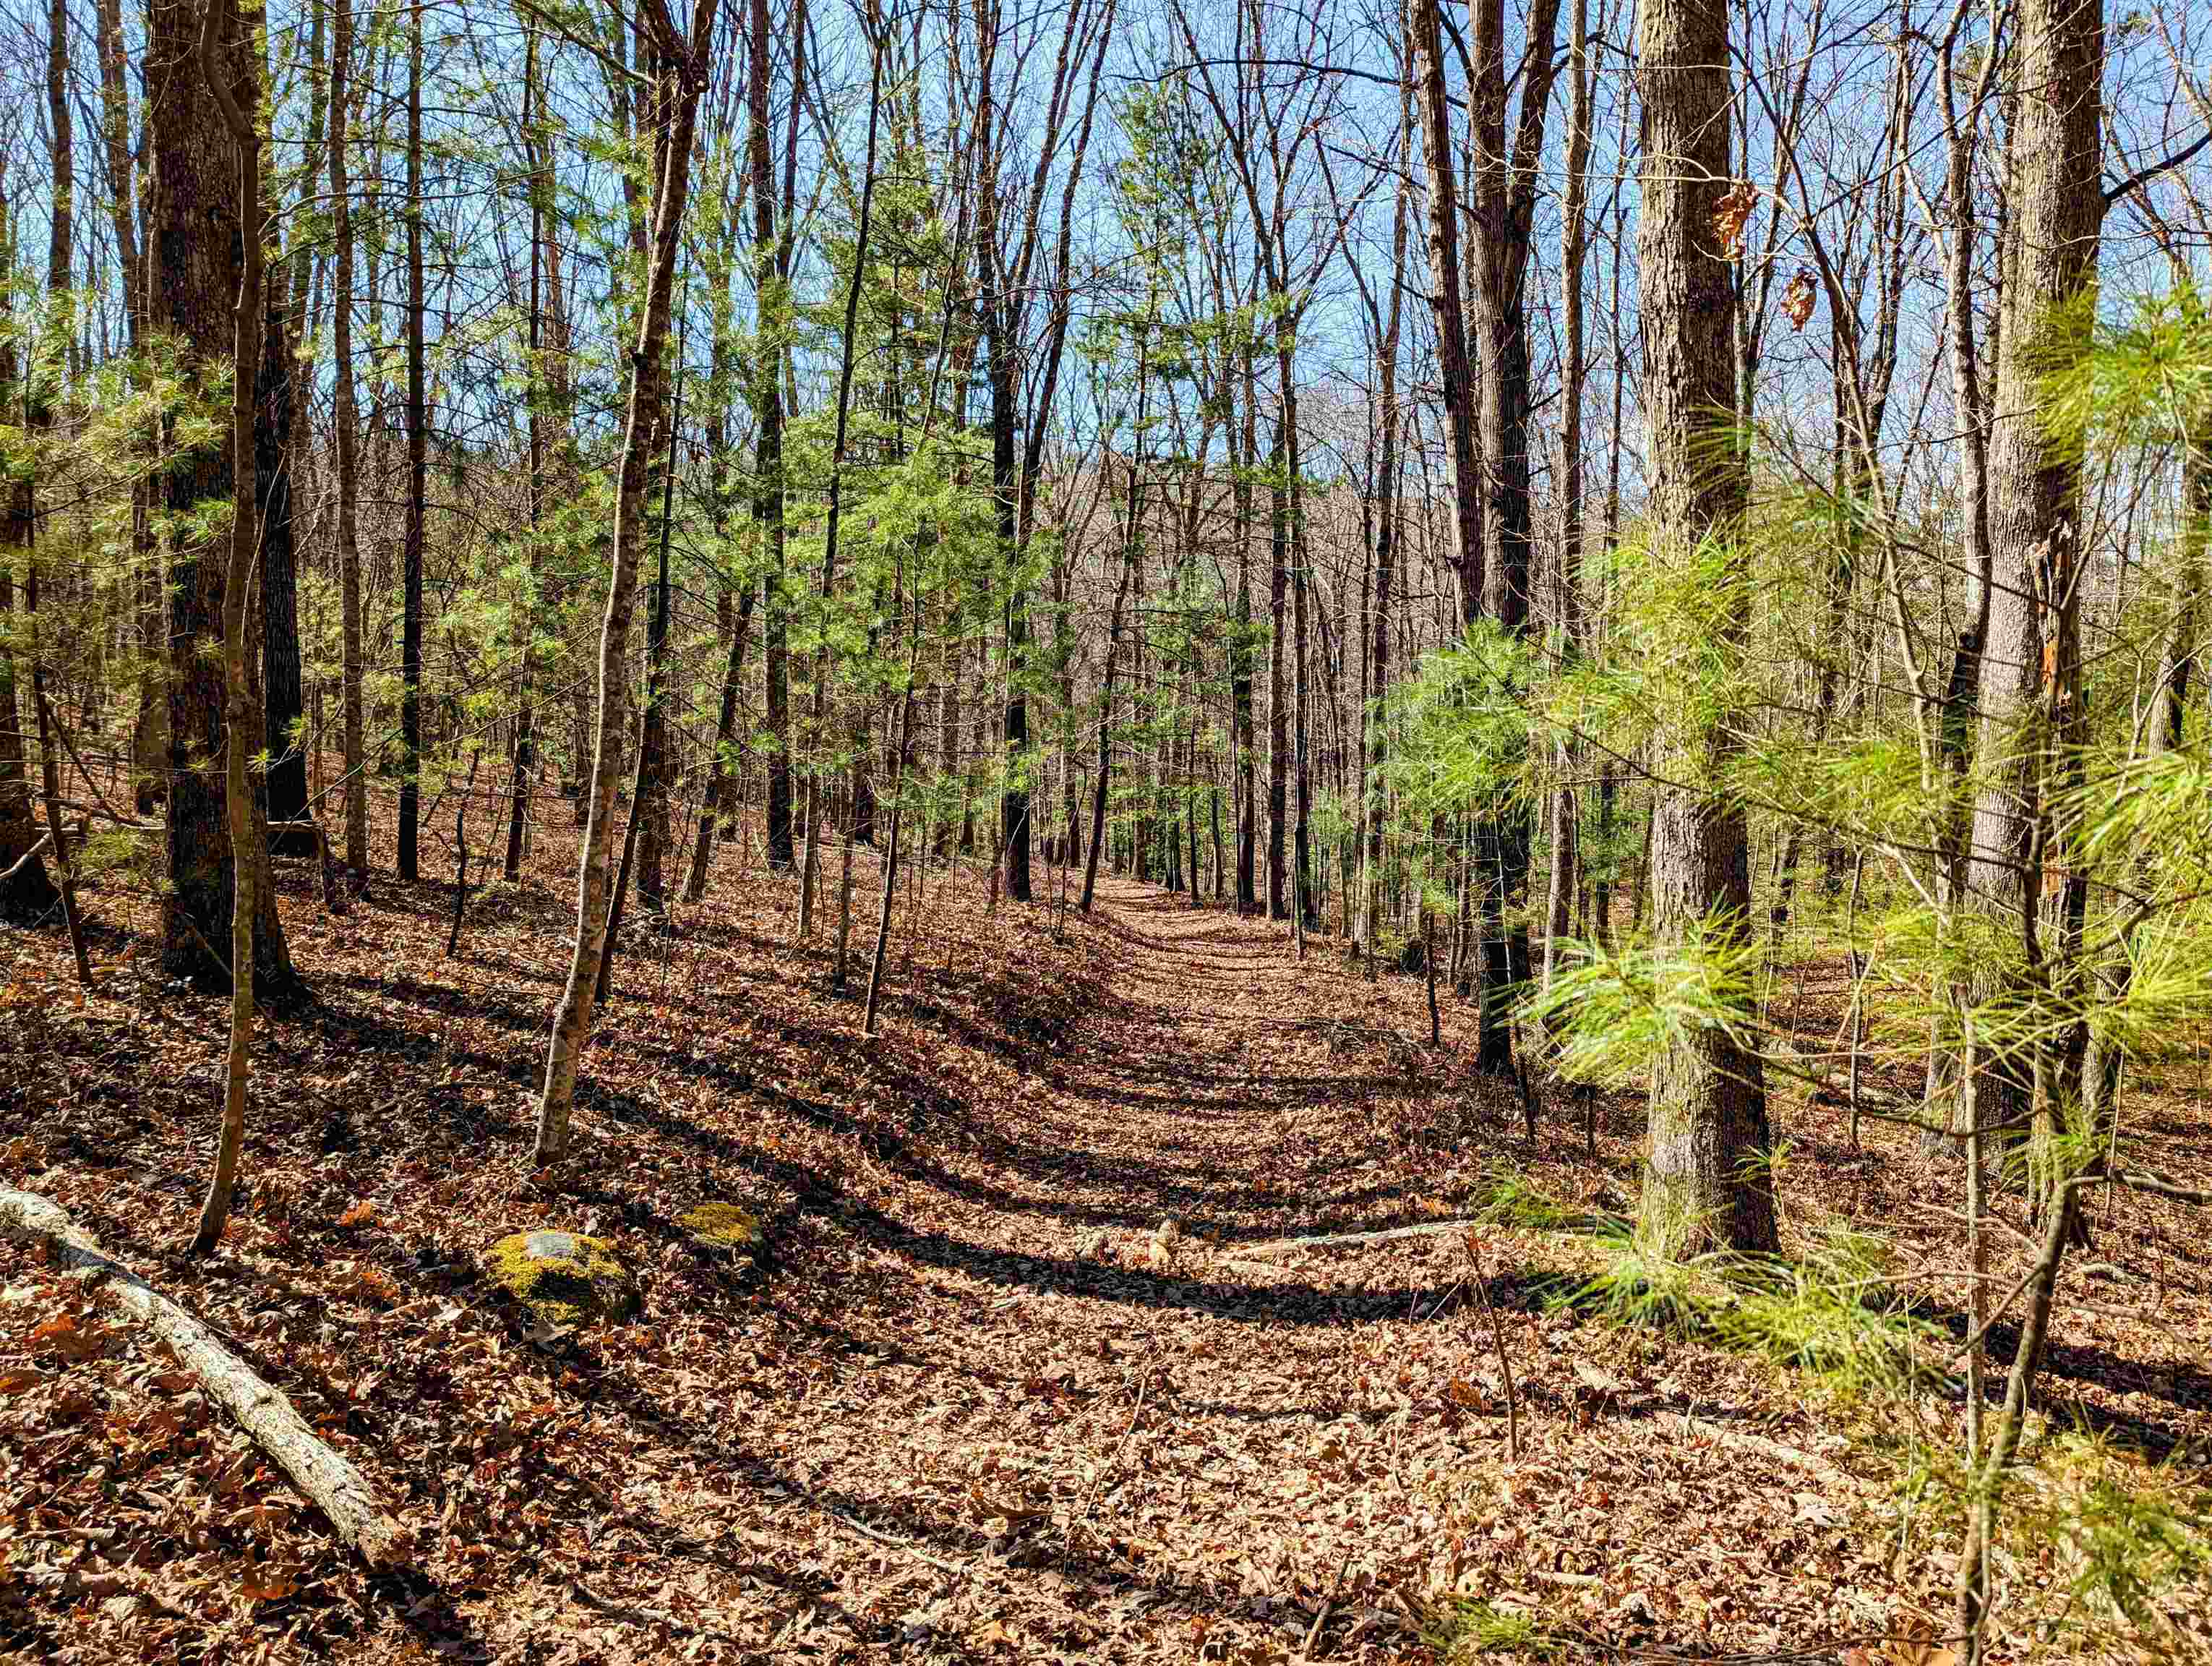 Discover the perfect retreat on this 29.62-acre all wooded property near Wytheville, VA. Accessible via a 50' deeded easement at the cul de sac of Pres Jackson Rd, the right of way is clearly marked. With a recorded survey in place, this land offers endless opportunities for recreation, hunting, building your dream home, or investment. Located just minutes from Wytheville VA, the APEX complex, two interstate highways, and nearby public utilities this serene property is a rare find for those seeking a peaceful escape with convenient access to amenities.